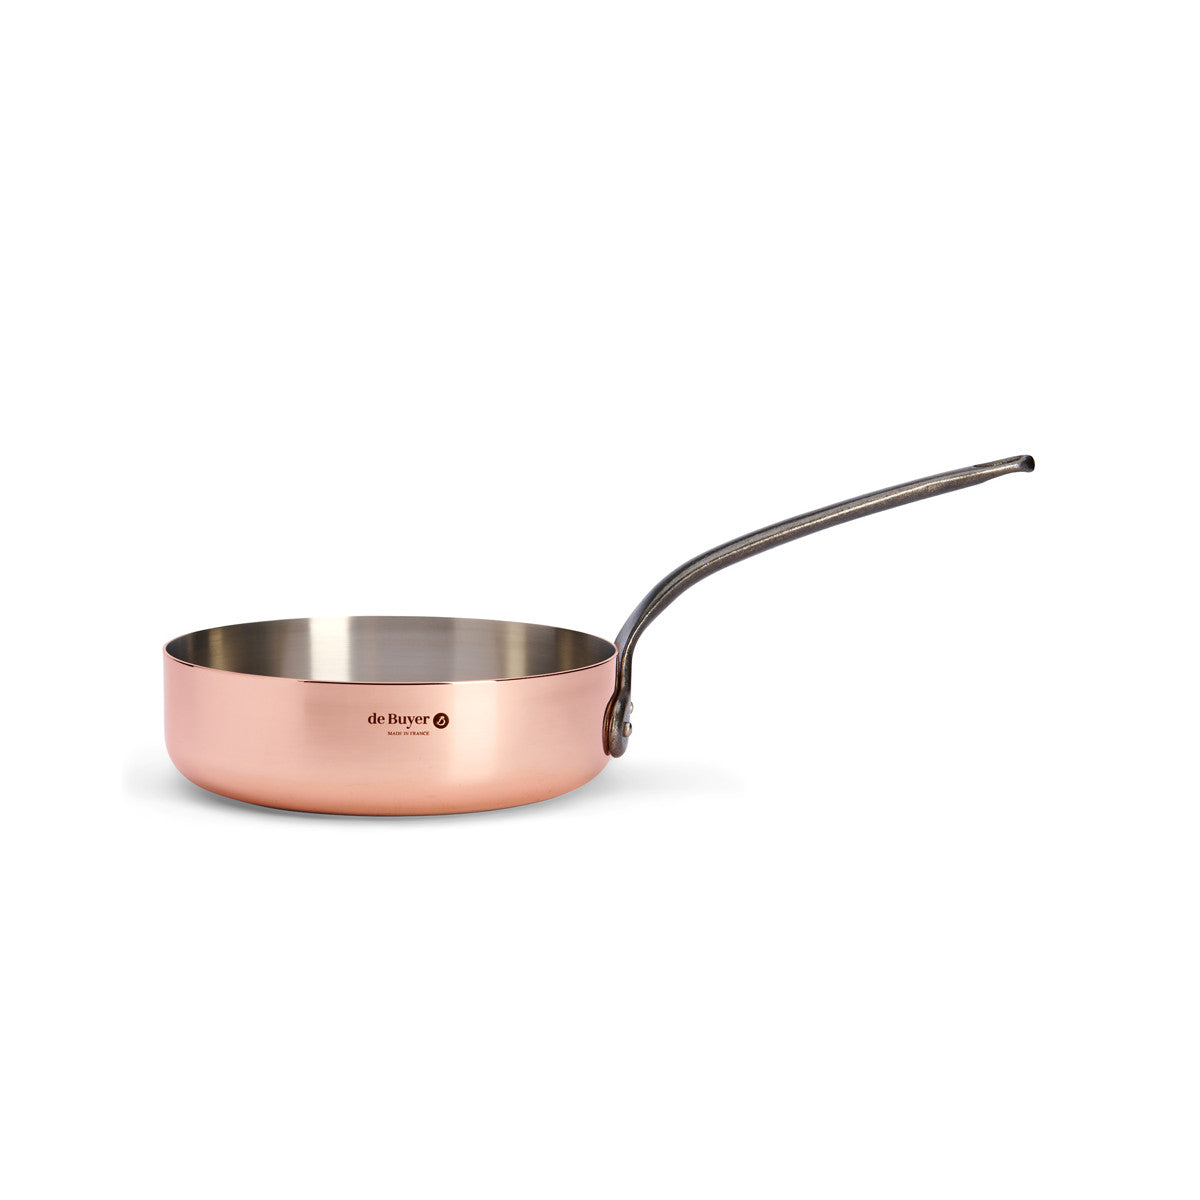 De Buyer Prima Matera Tradition straight sauteuse for induction, 24 cm